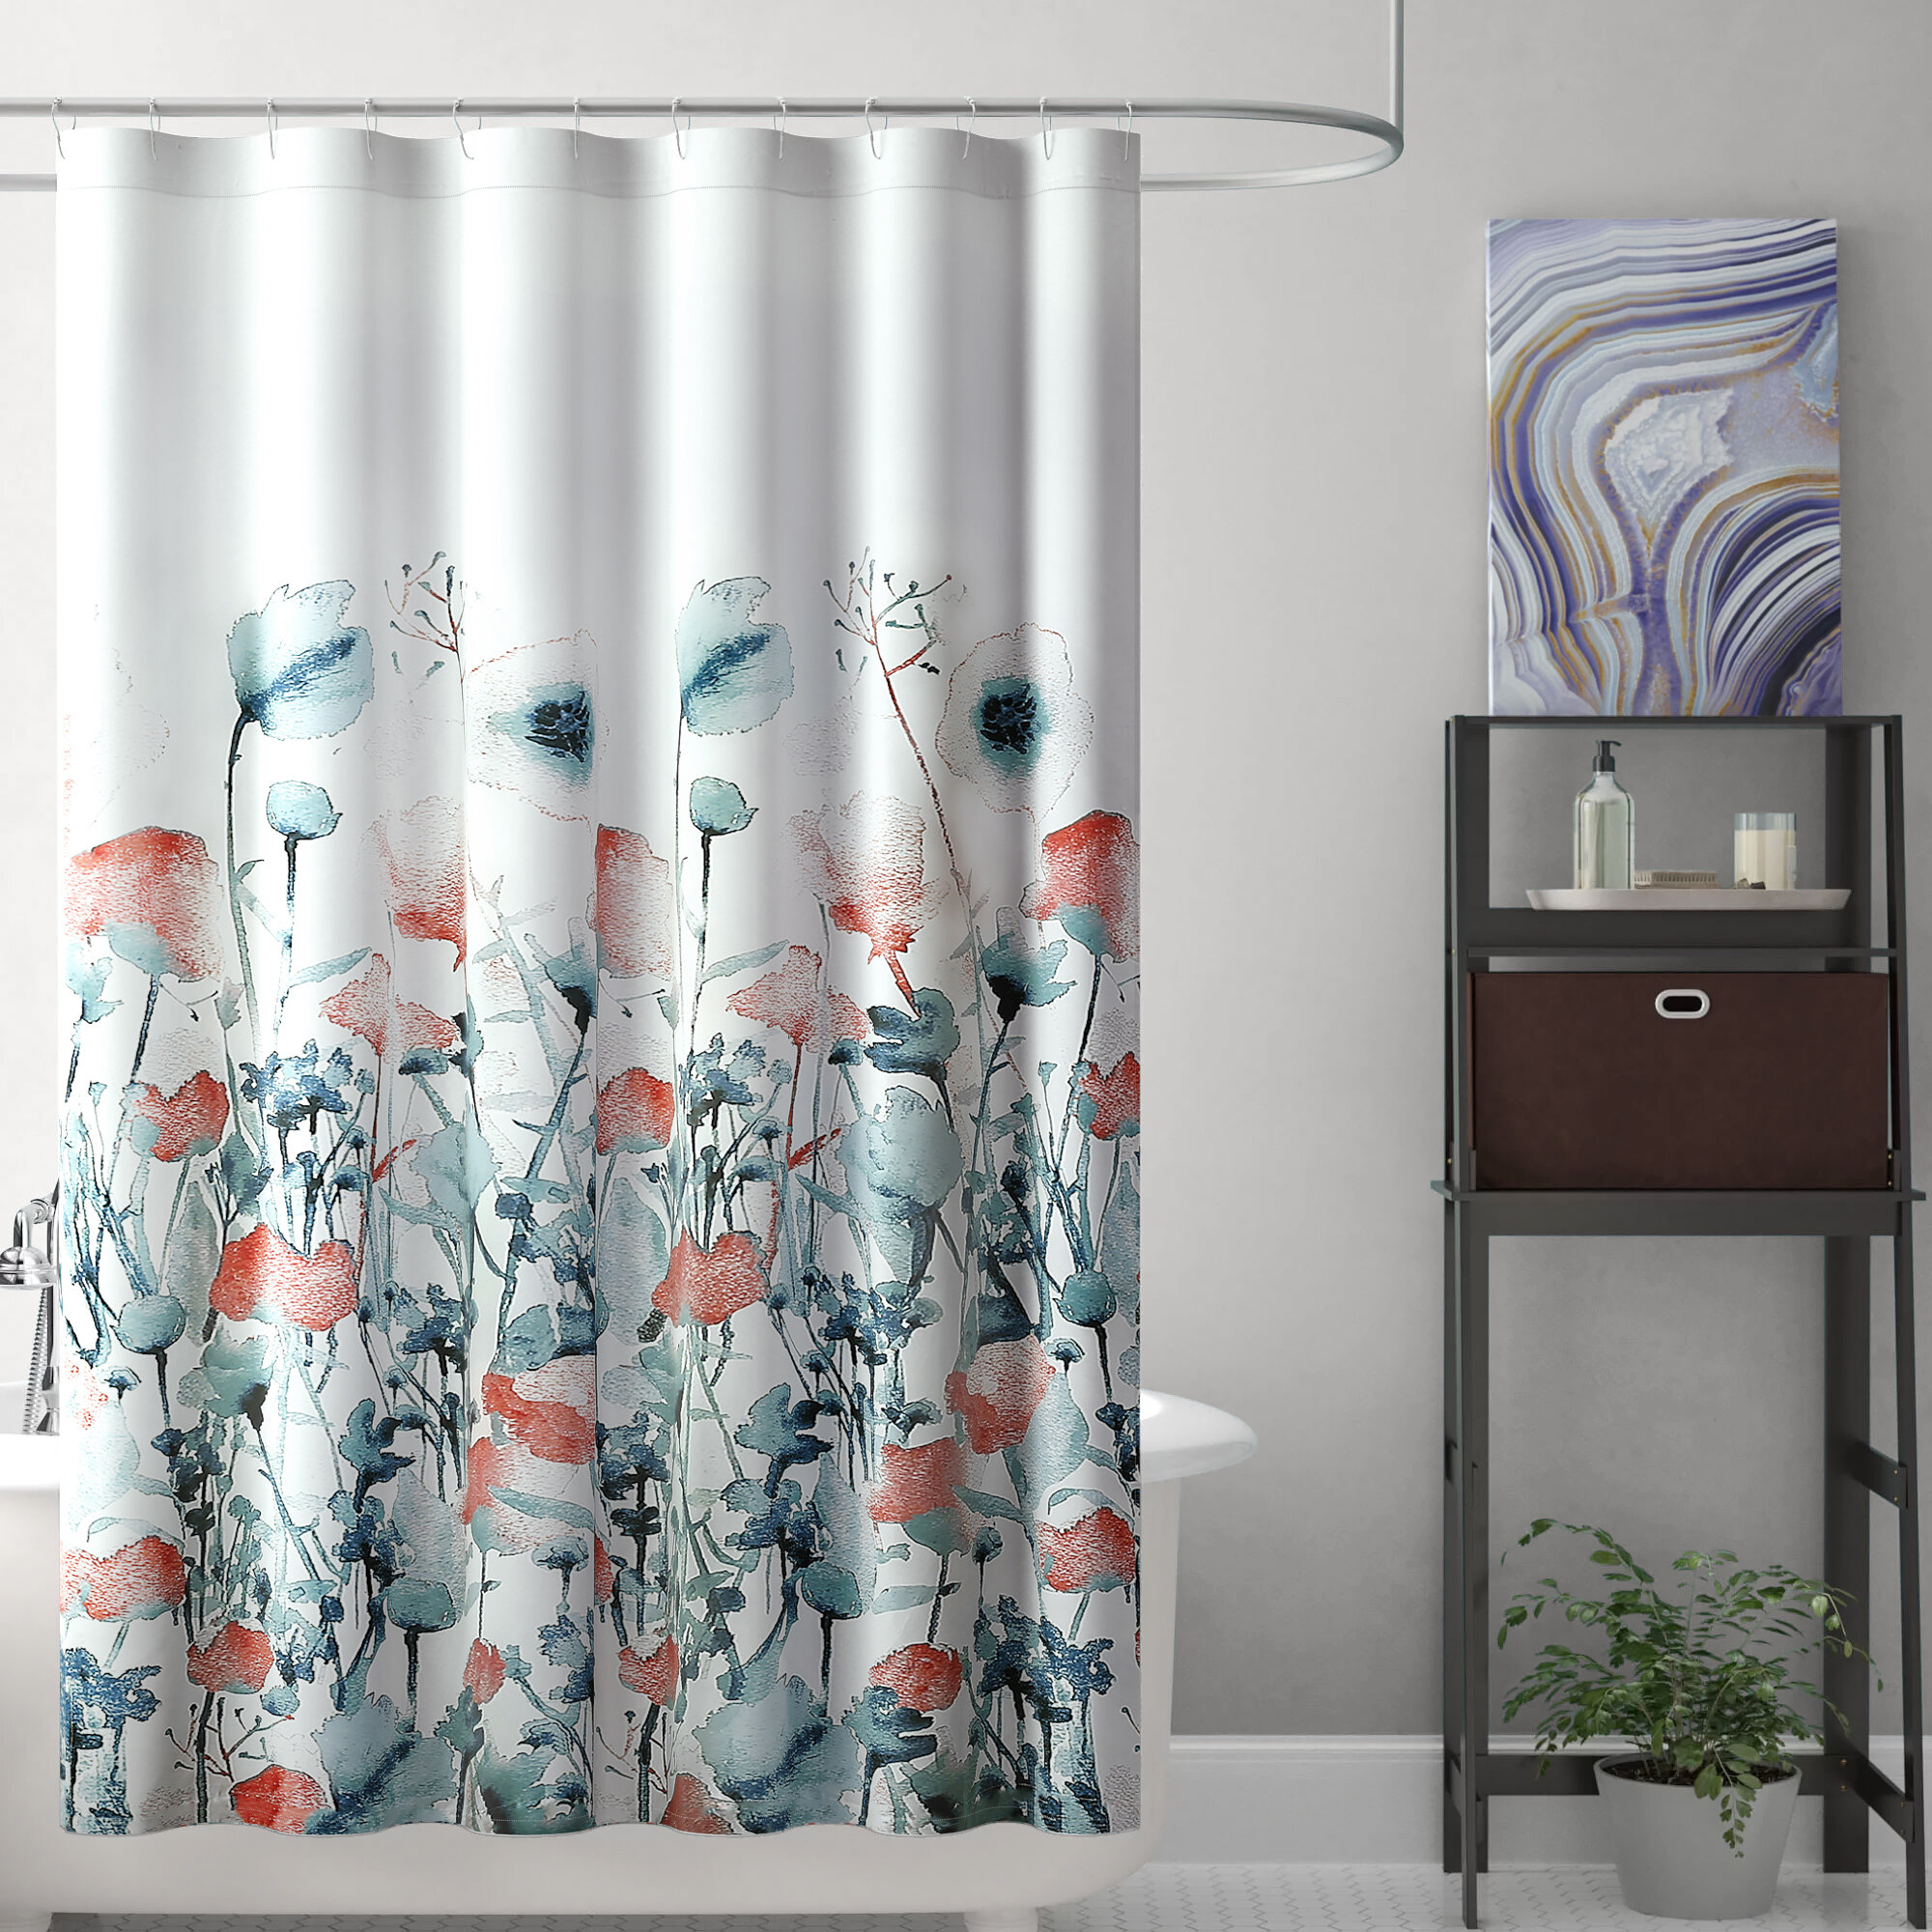 Pink CAROMIO Bathroom Curtain Shower 72 x 72 Inches Long Rustic Flower Shower Curtains for Bathtub Fabric Floral Waterproof Curtain 